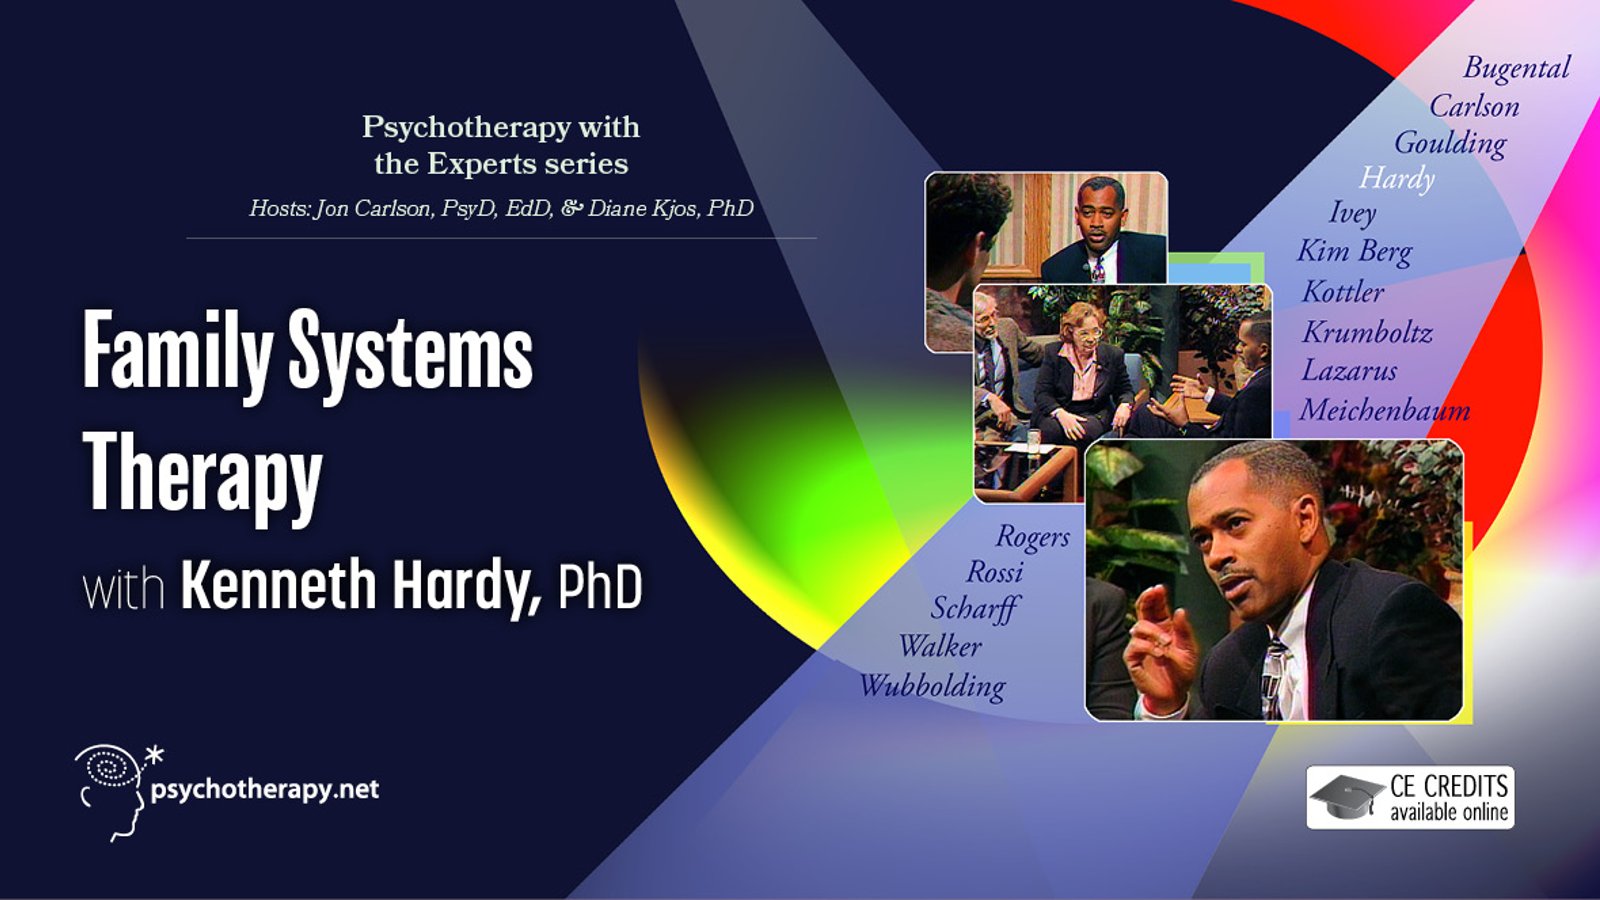 Family Systems Therapy - With Kenneth Hardy